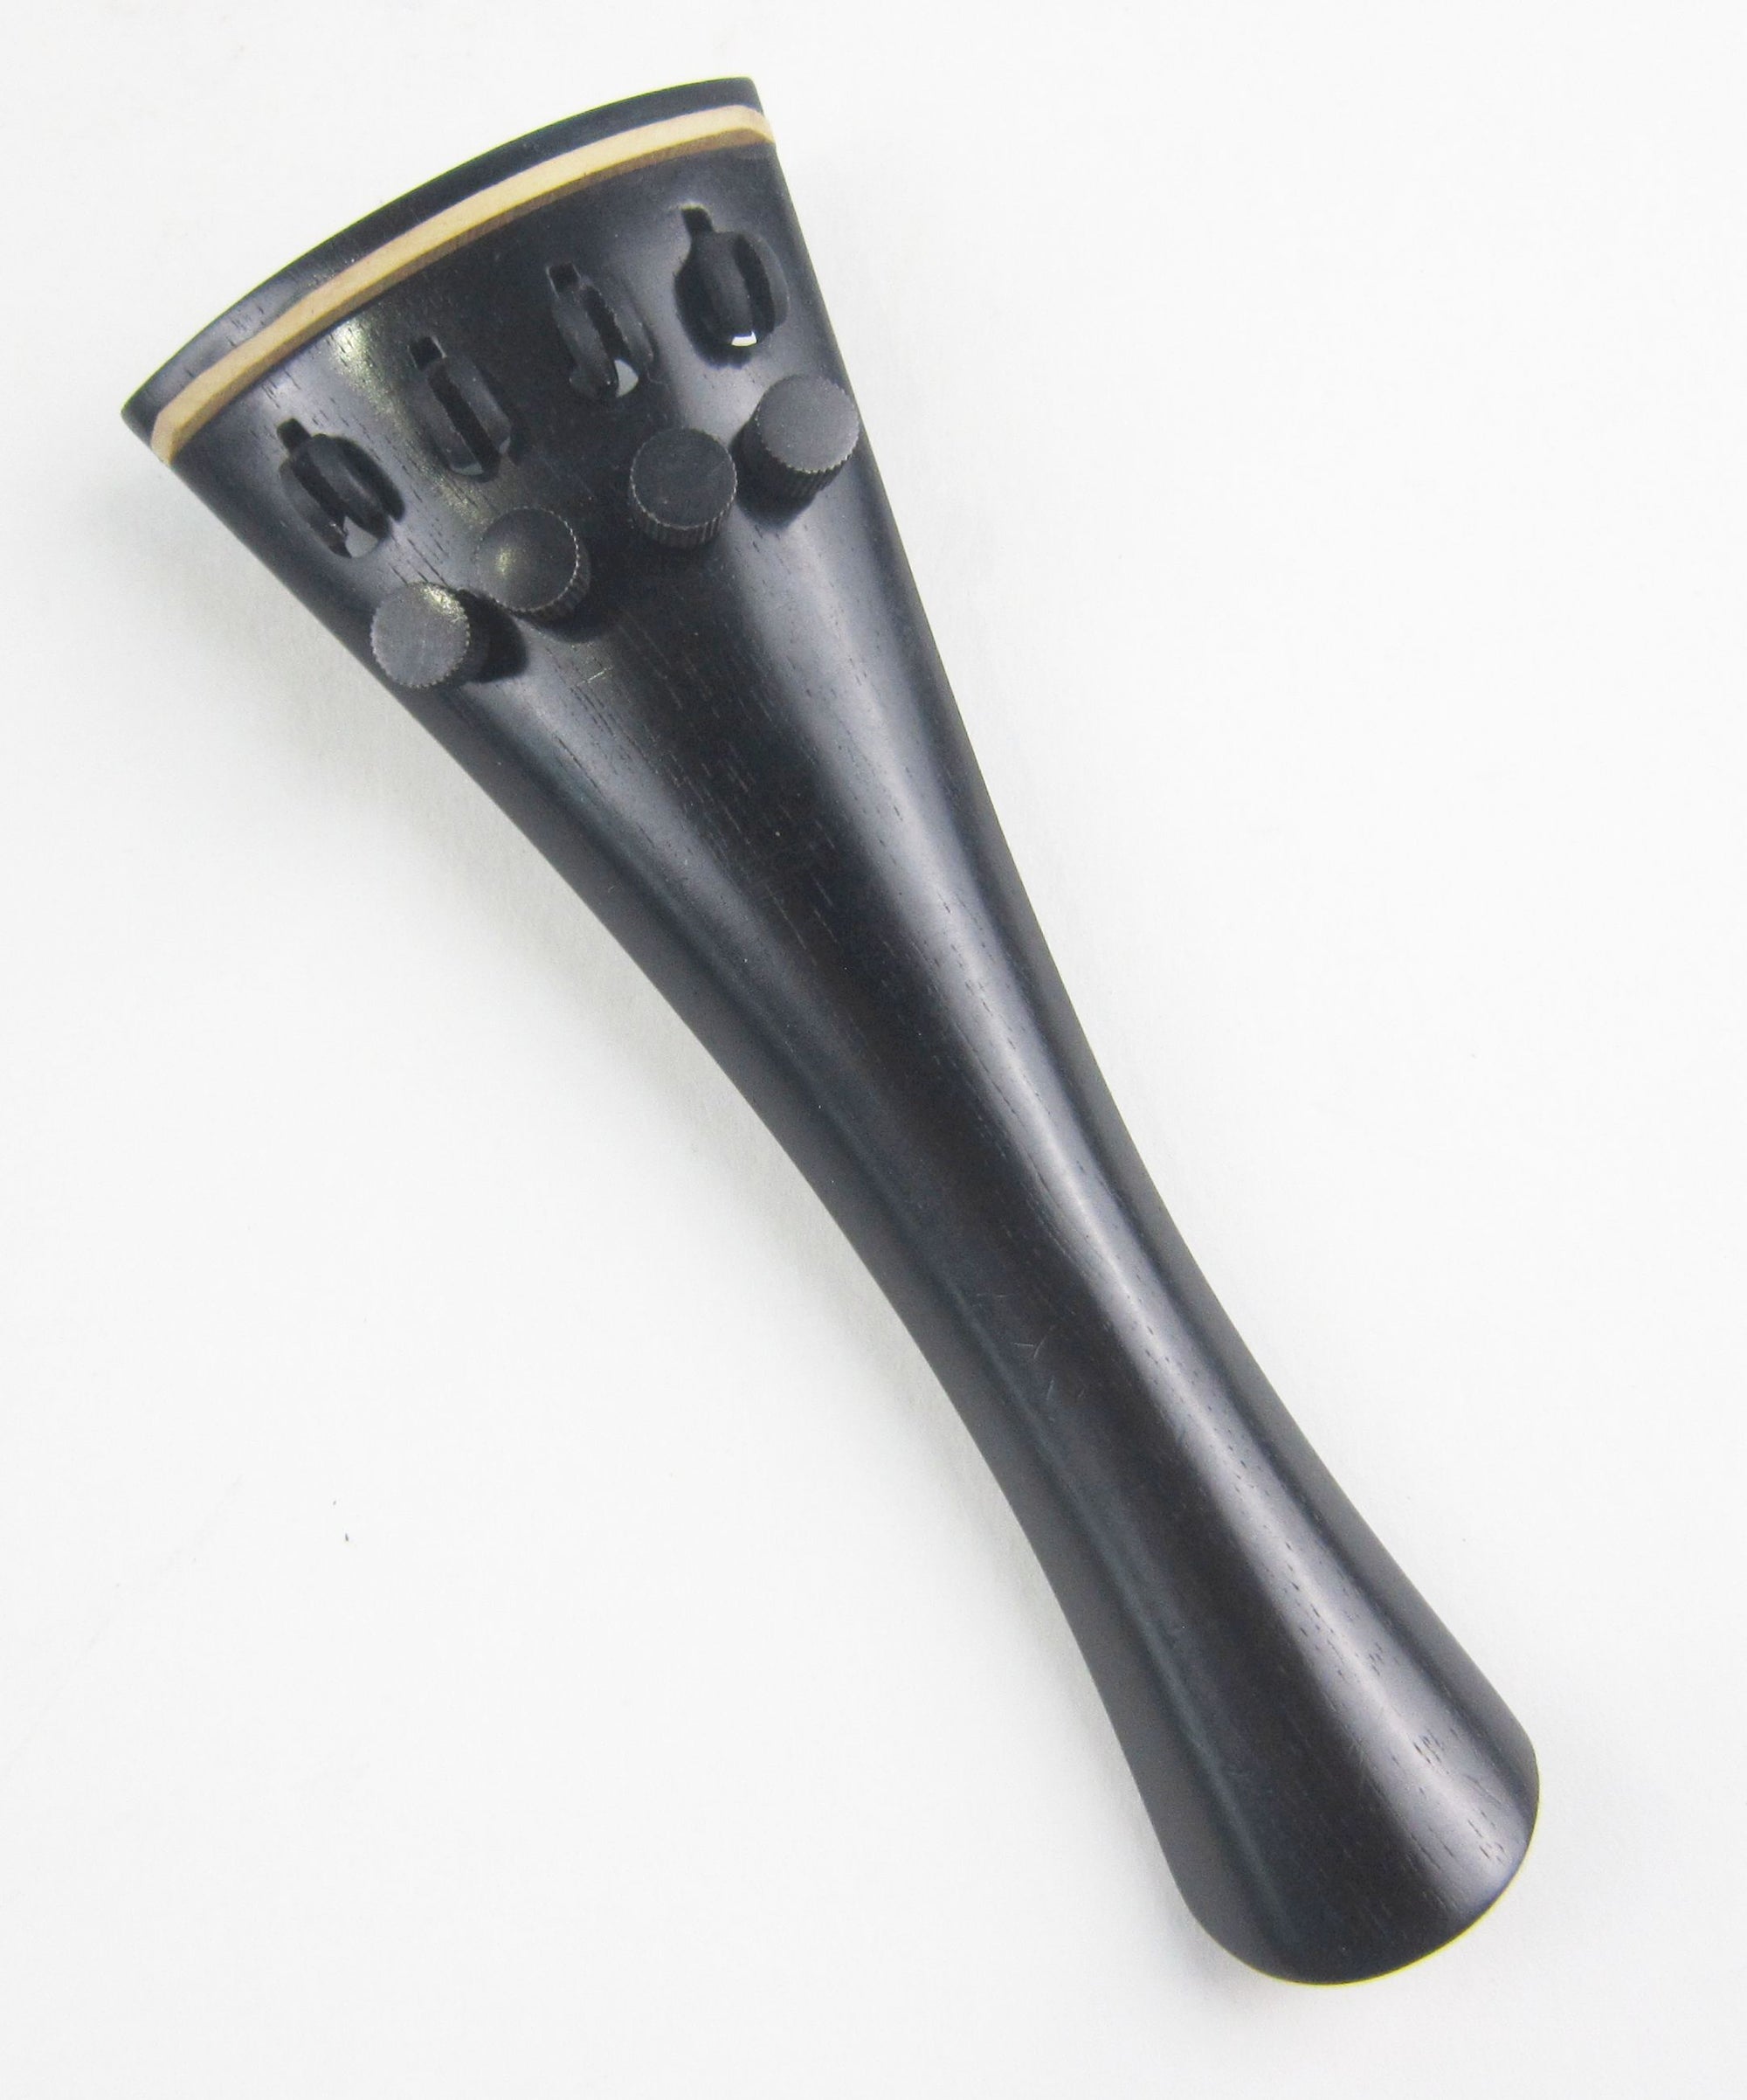 violin tailpiece-French-Ebony-"Schmidt tailpiece"-white saddle-4 tuner-114mm